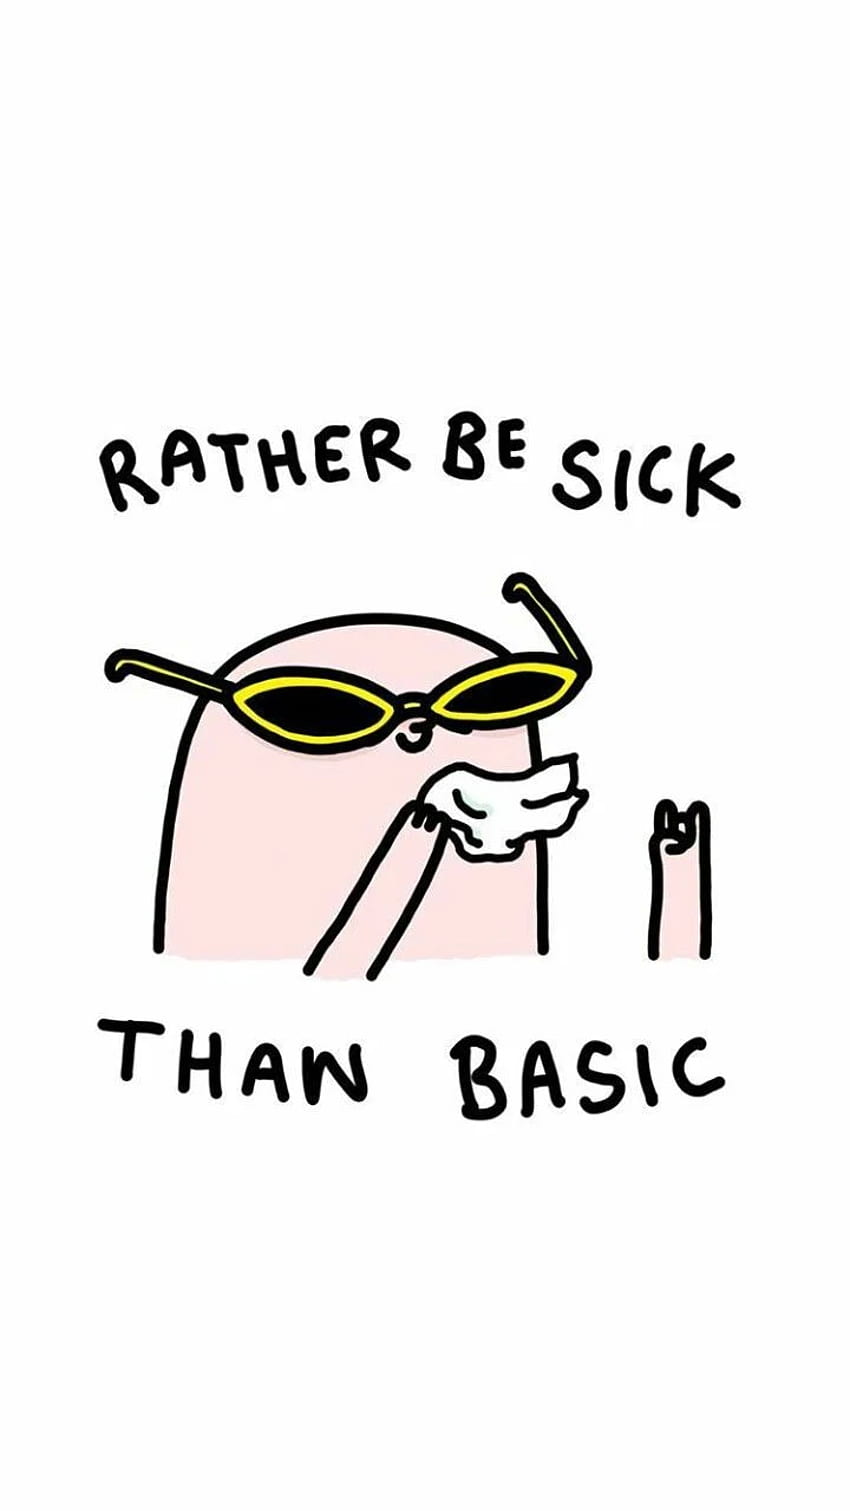 Rather be sick than basic. - Funny